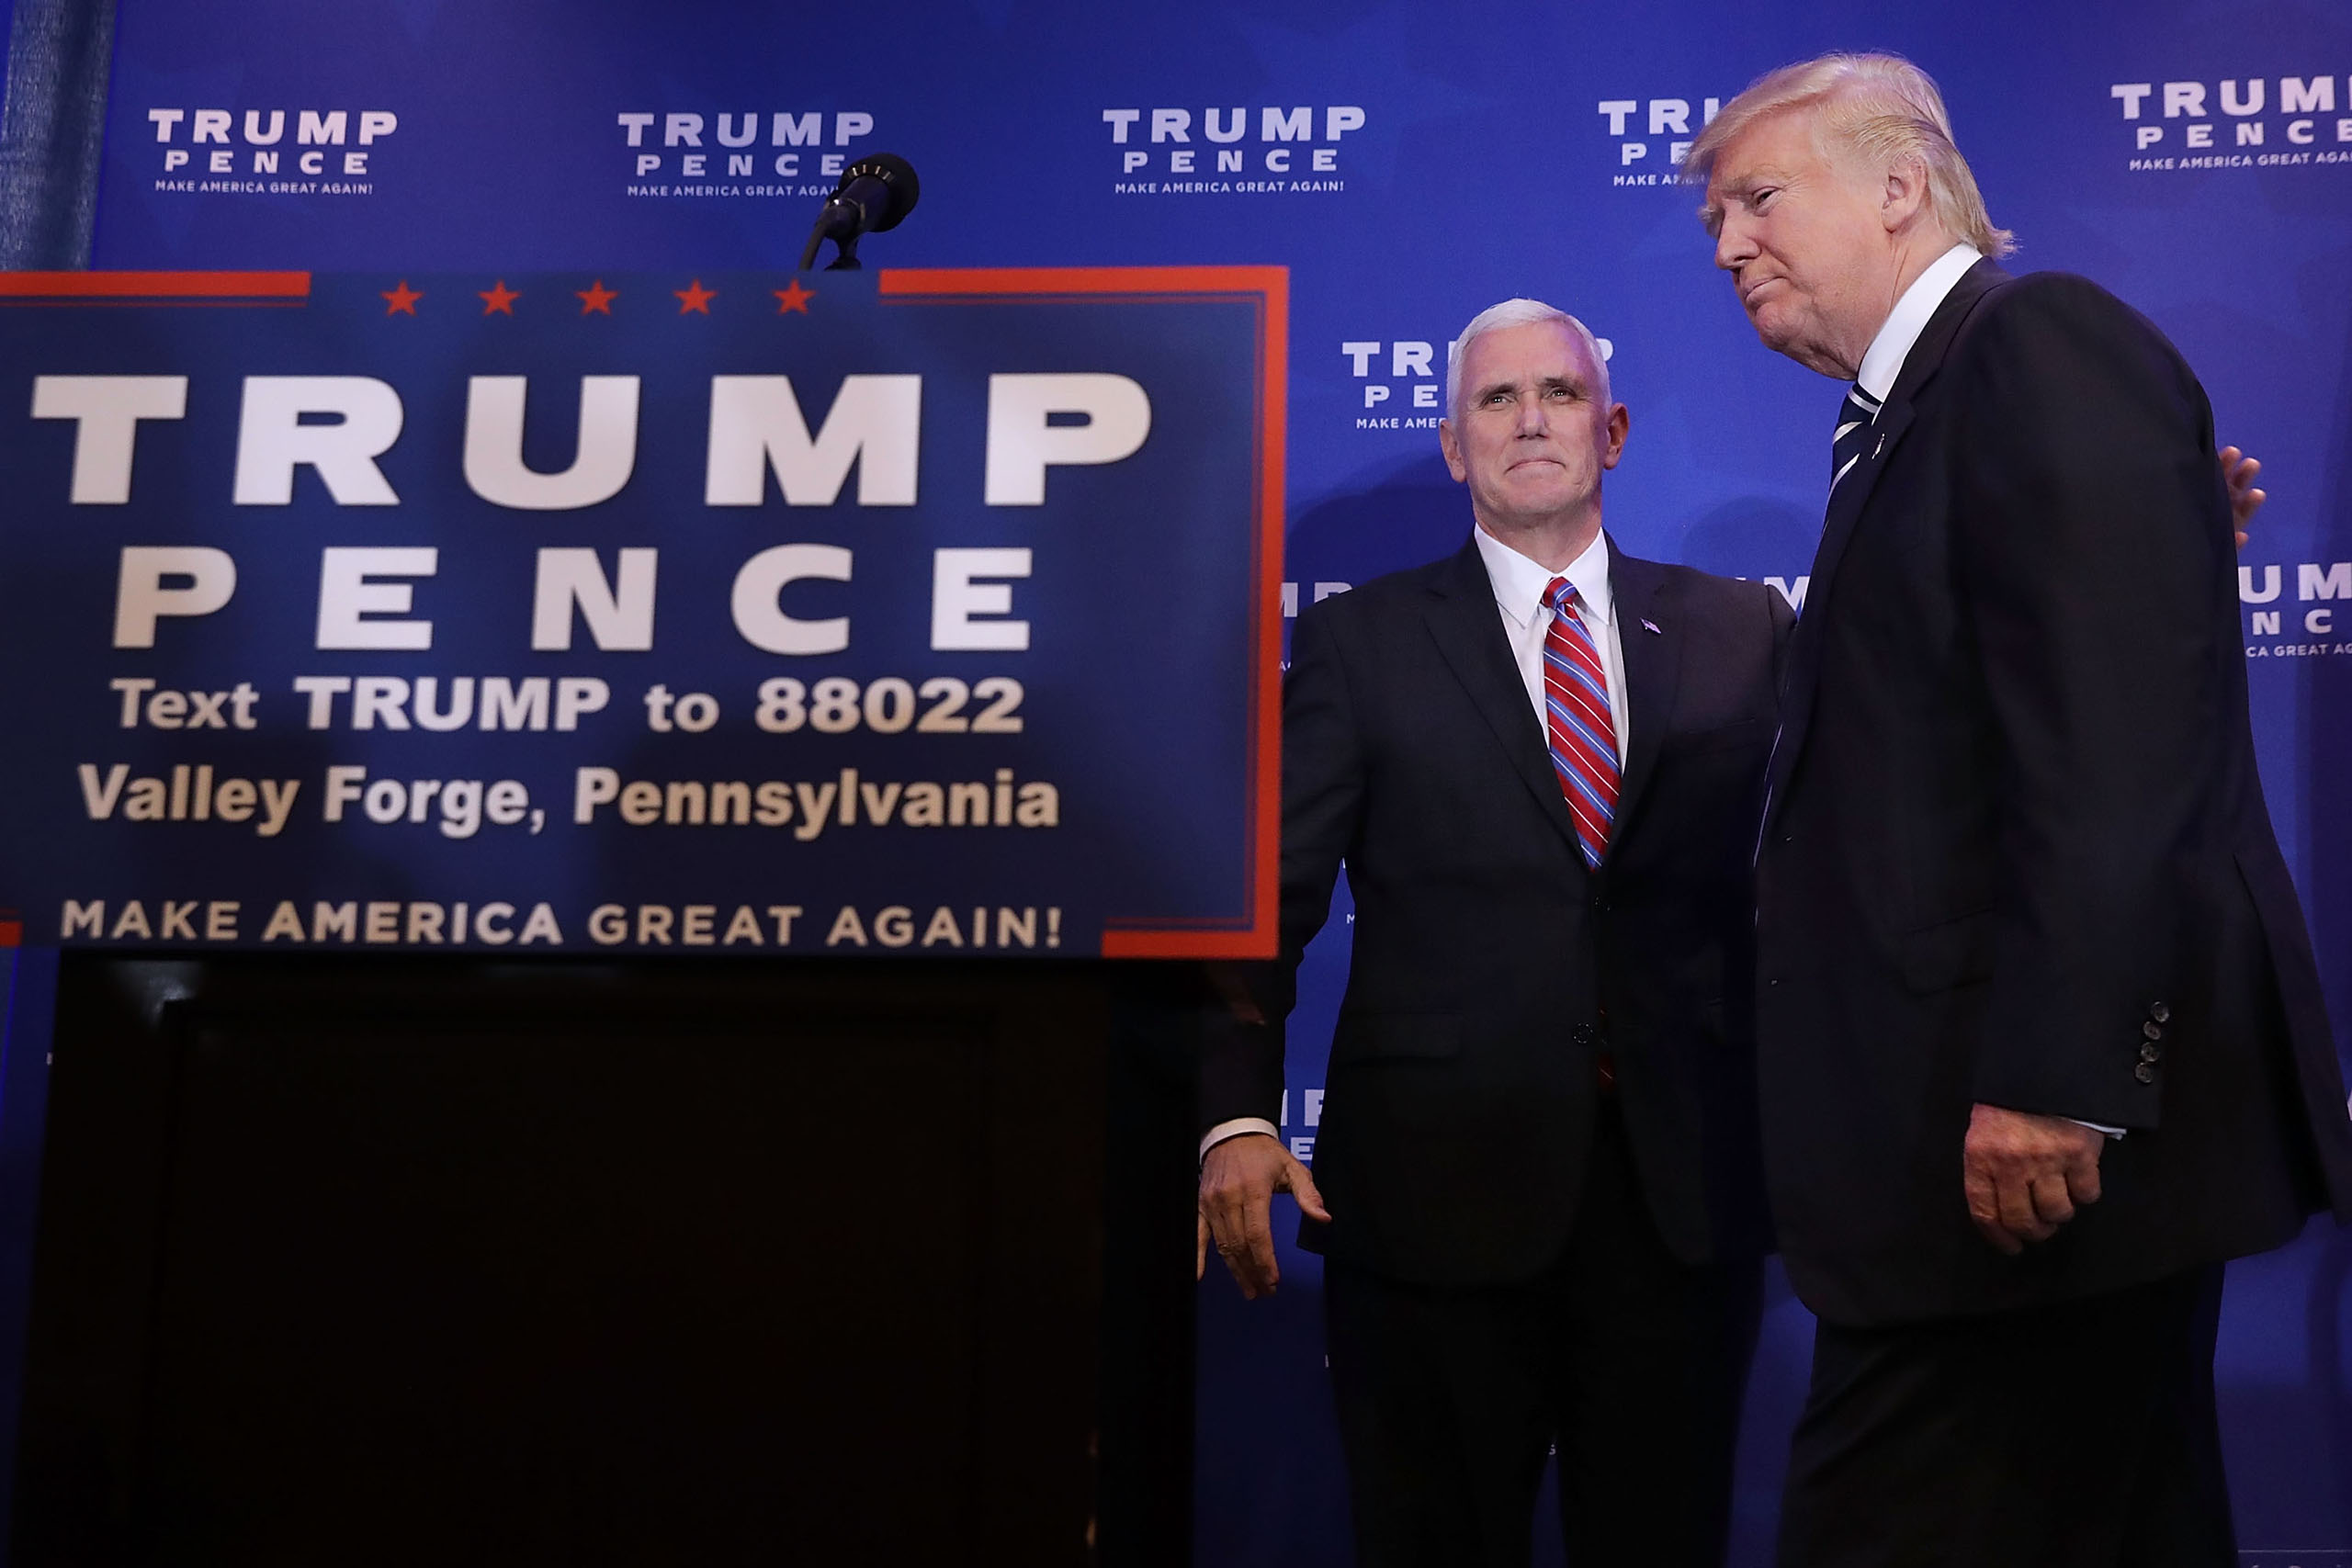 Mike Pence welcomes Donald Trump to the stage during a campaign event in Valley Forge, Penn. on Nov. 1, 2016. (Chip Somodevilla—Getty Images)